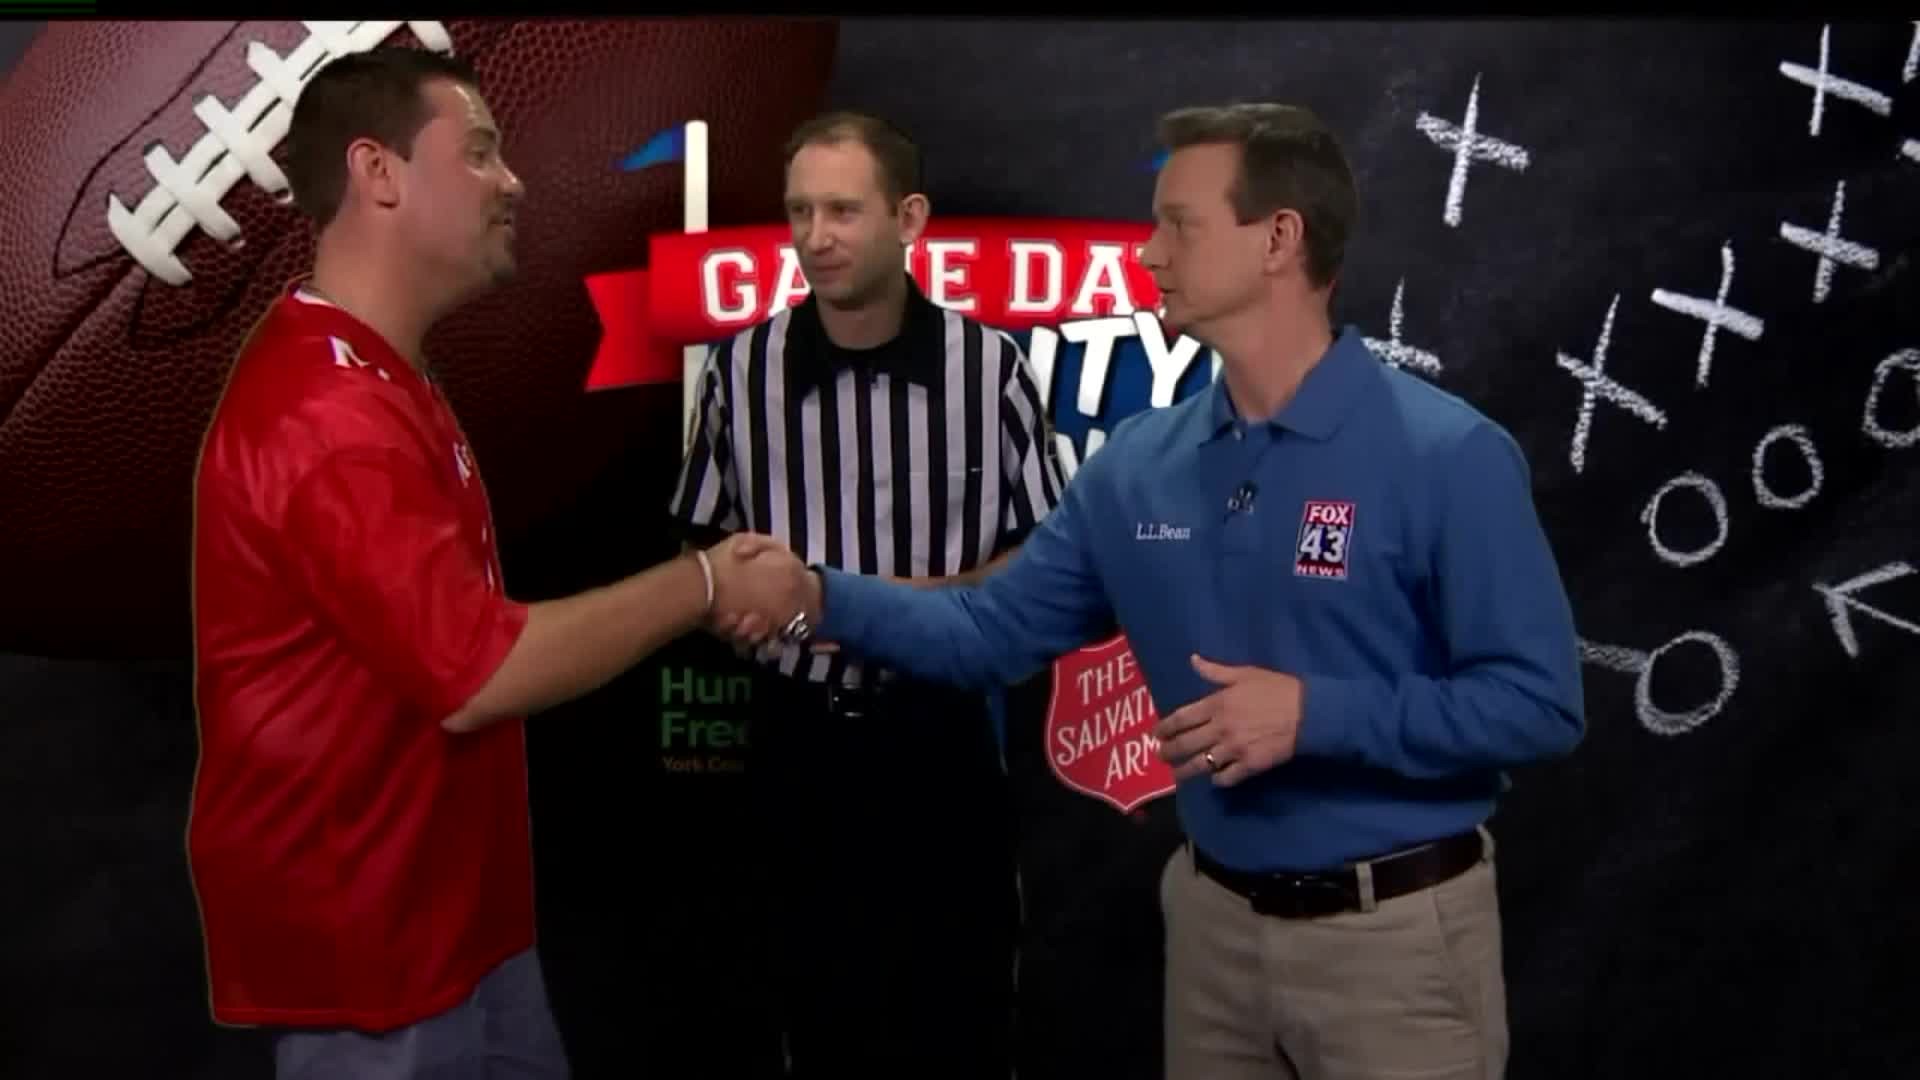 Gameday Charity Challenege, Todd loses again